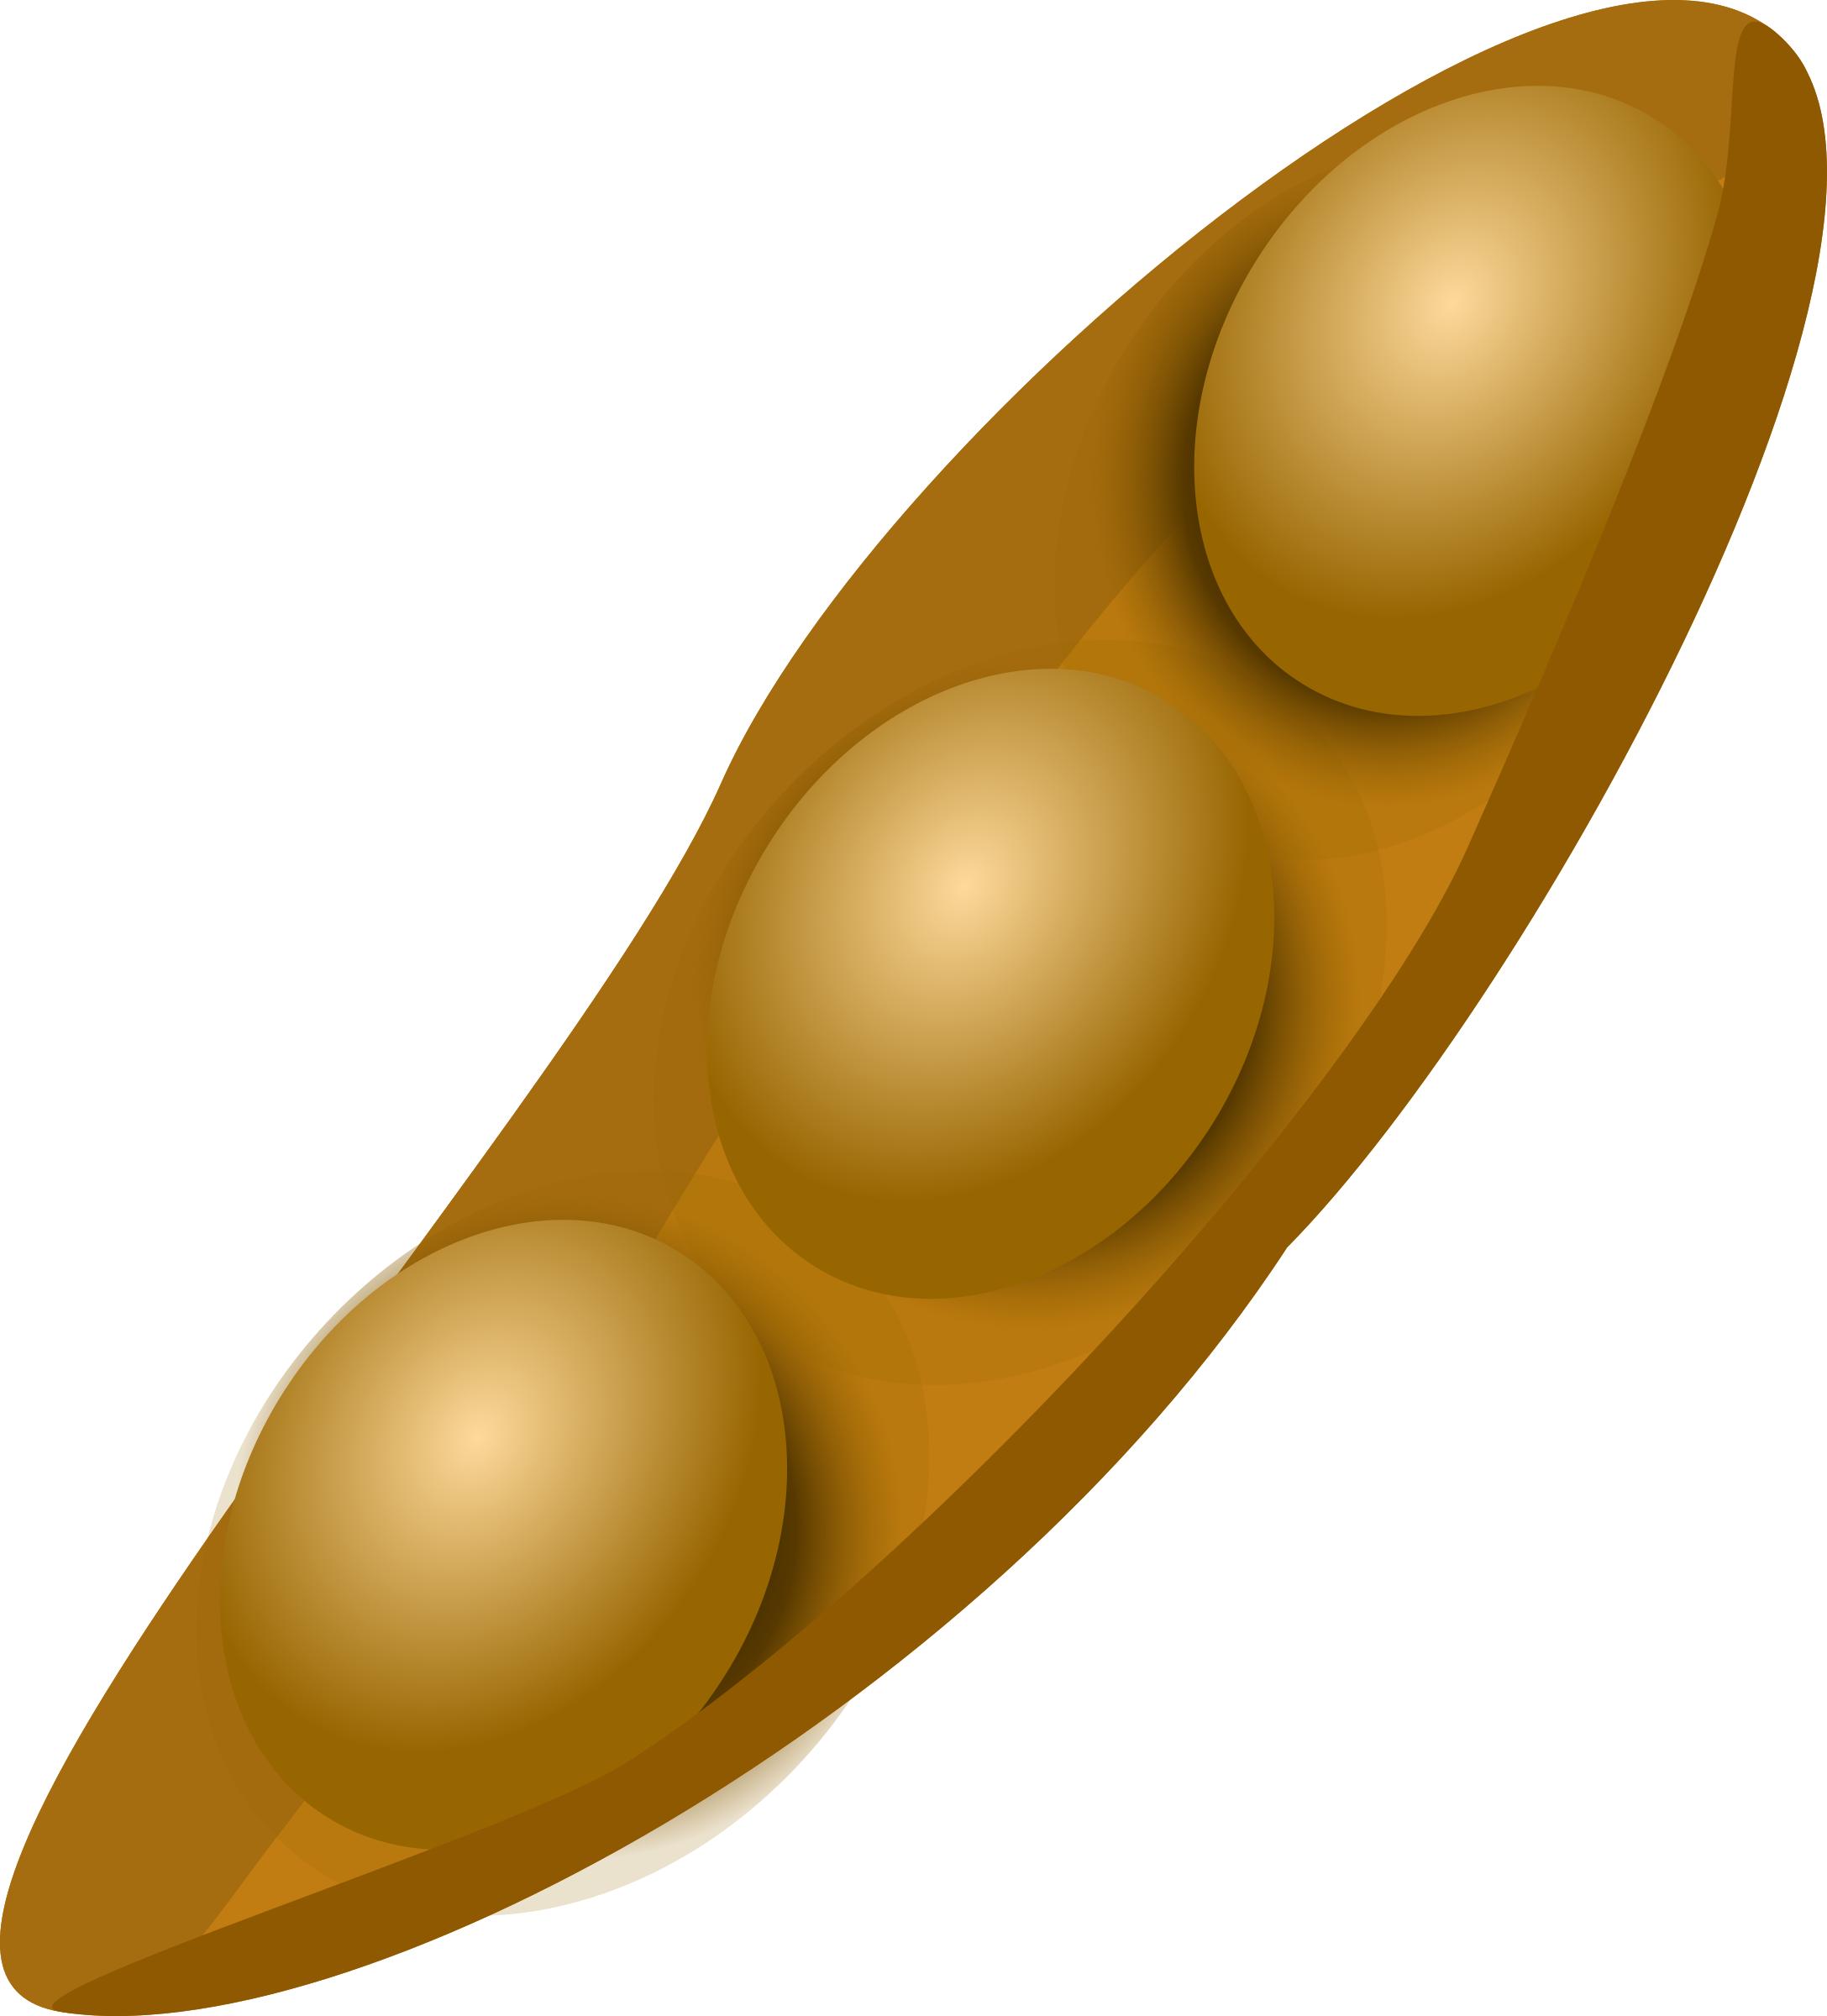 Soybean beans png